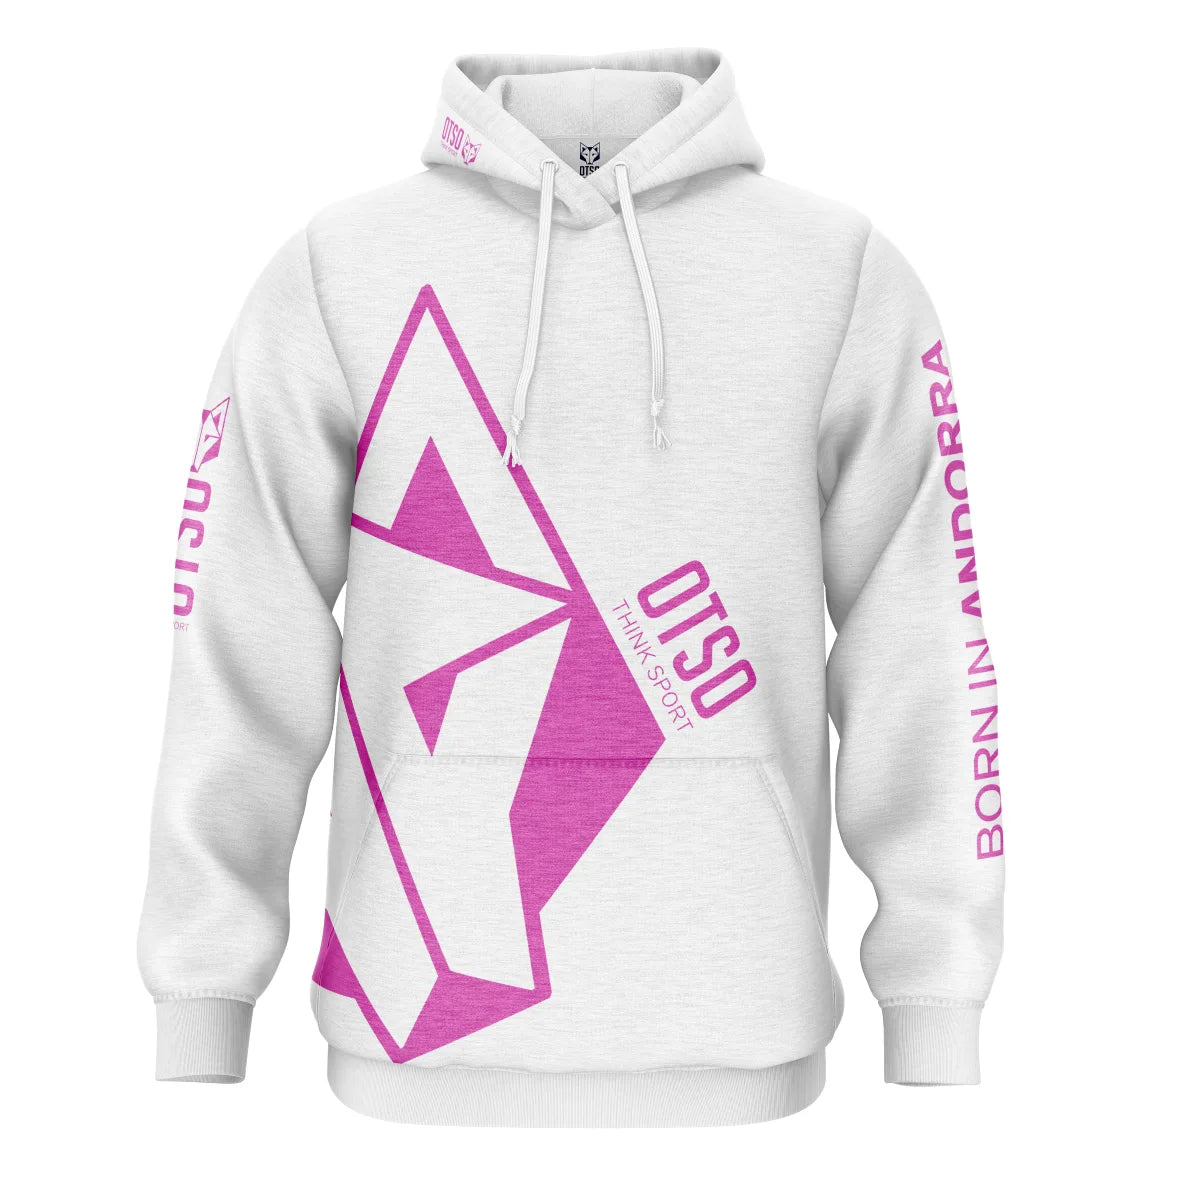 Hoodie - White & Fluo Pink Otso